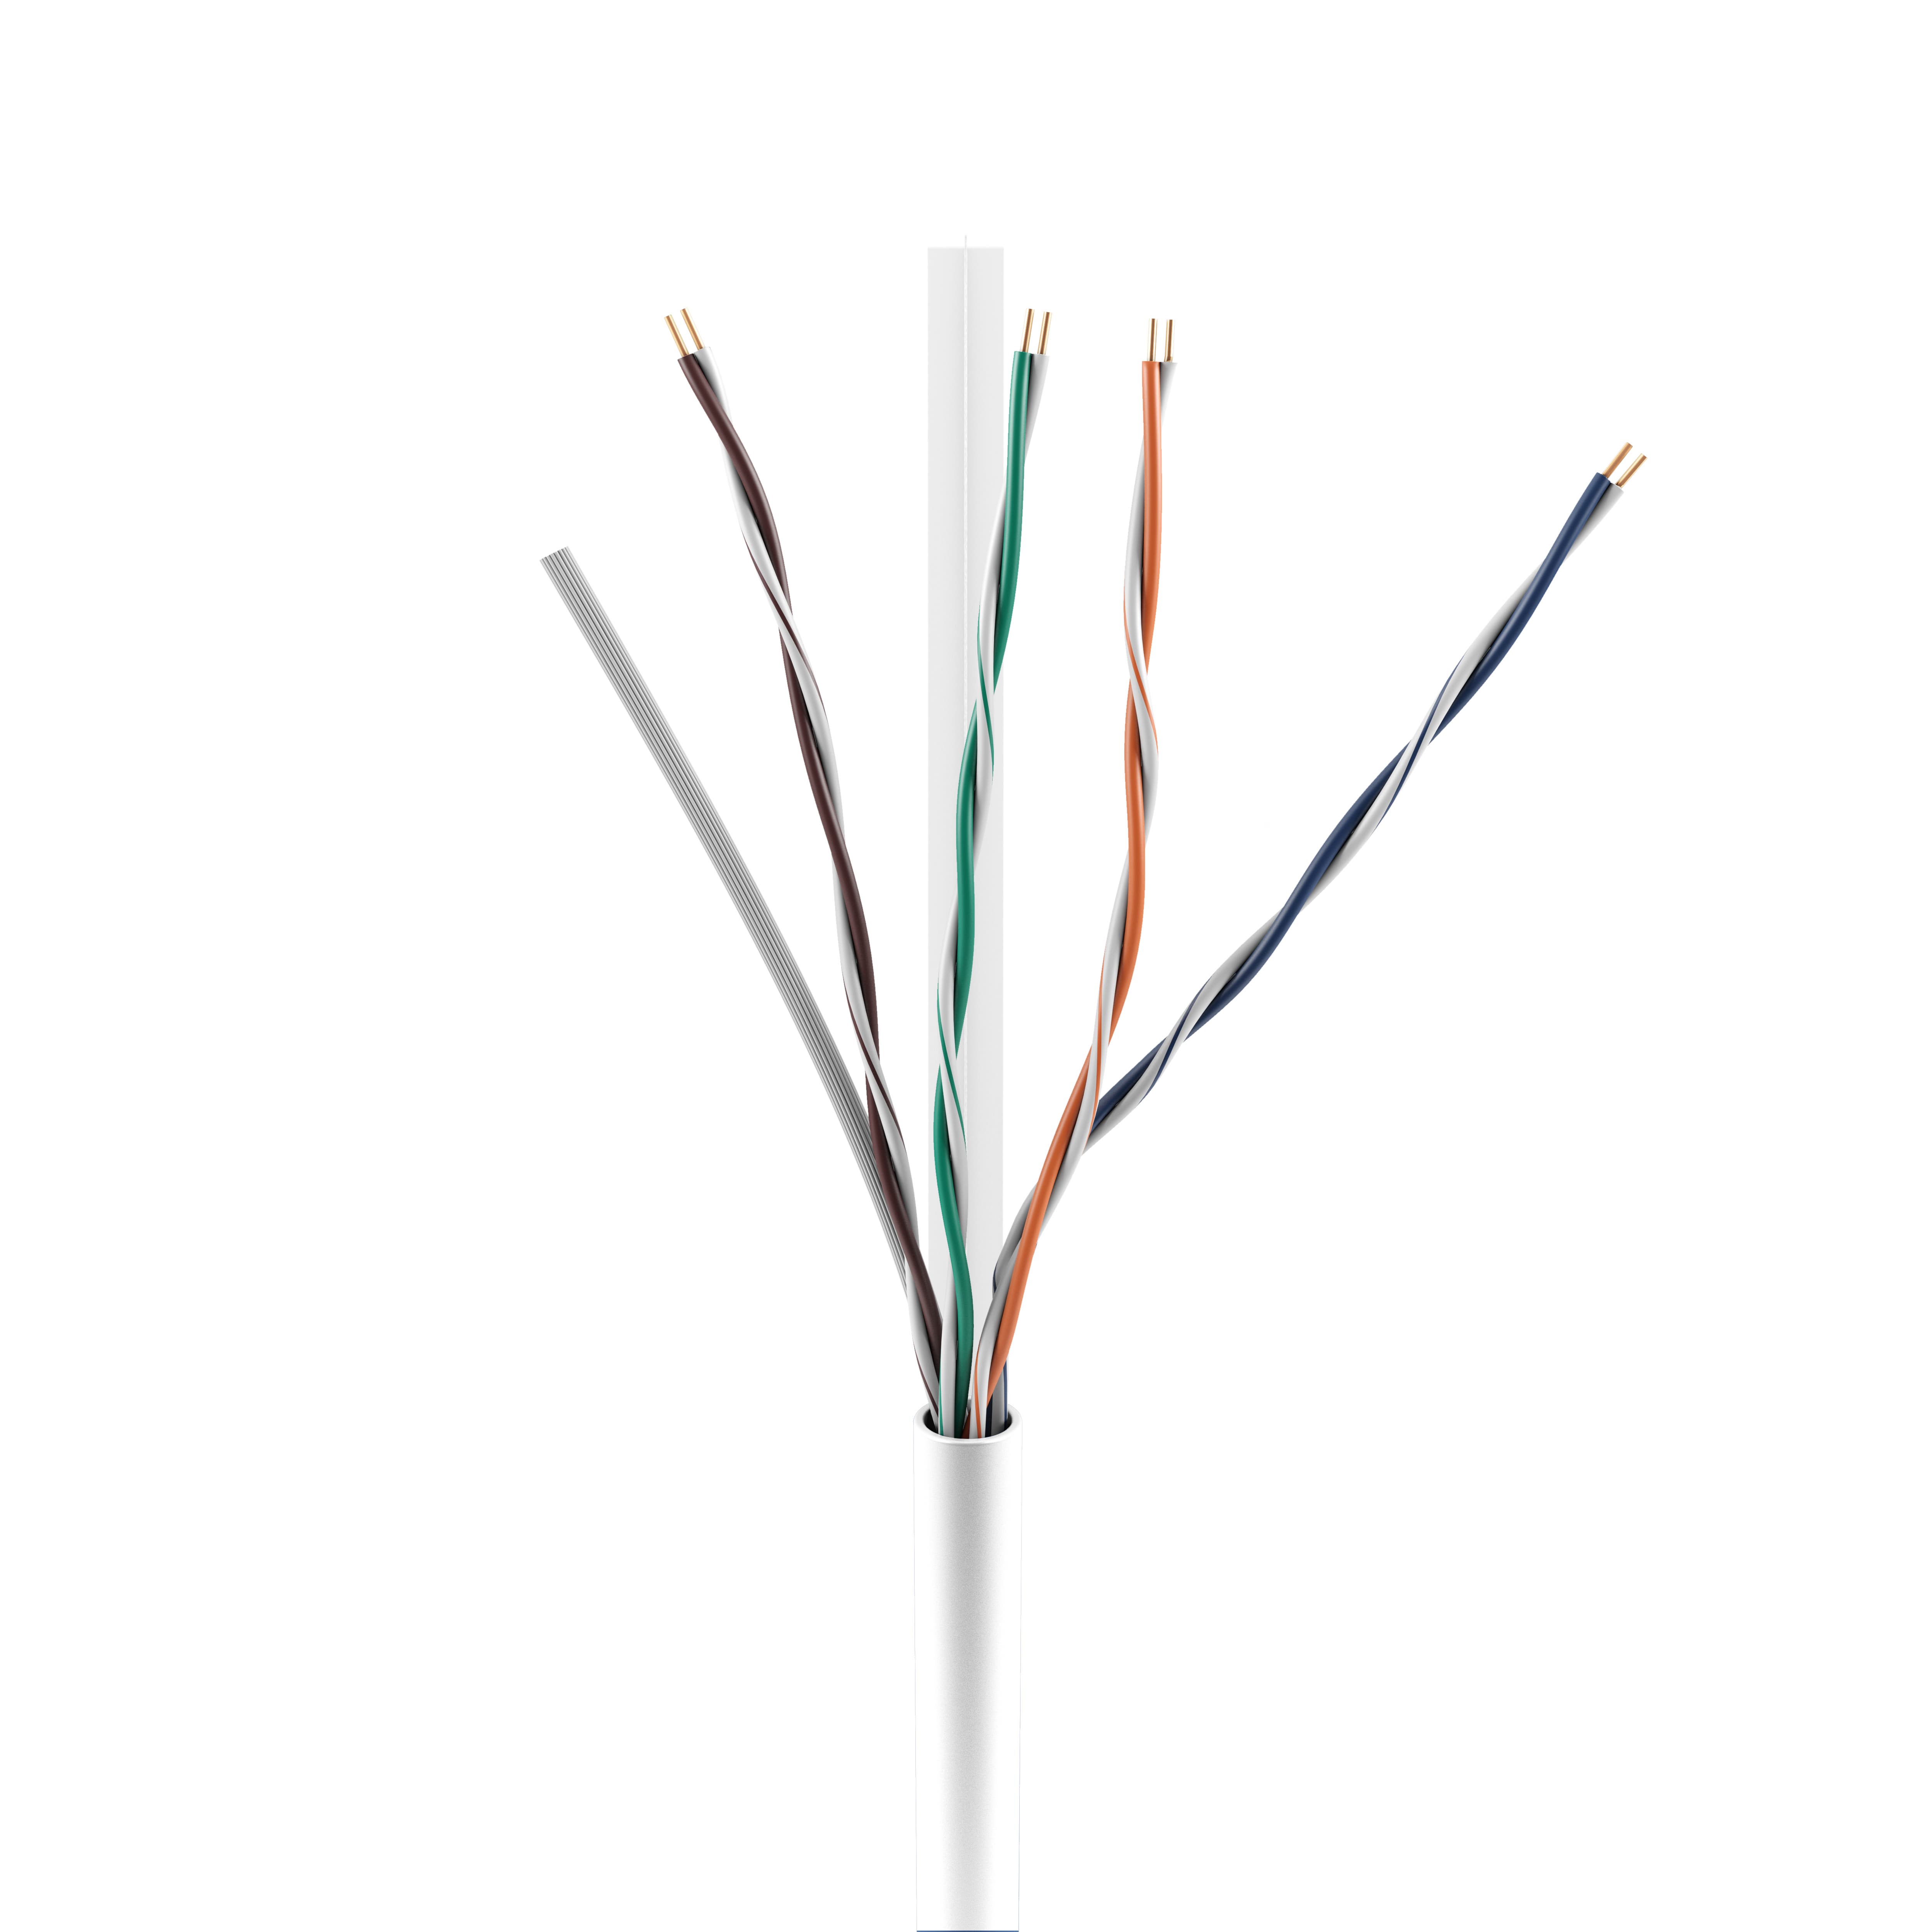 LAN CABLE_UTP CABLE_ FTP CABLE_